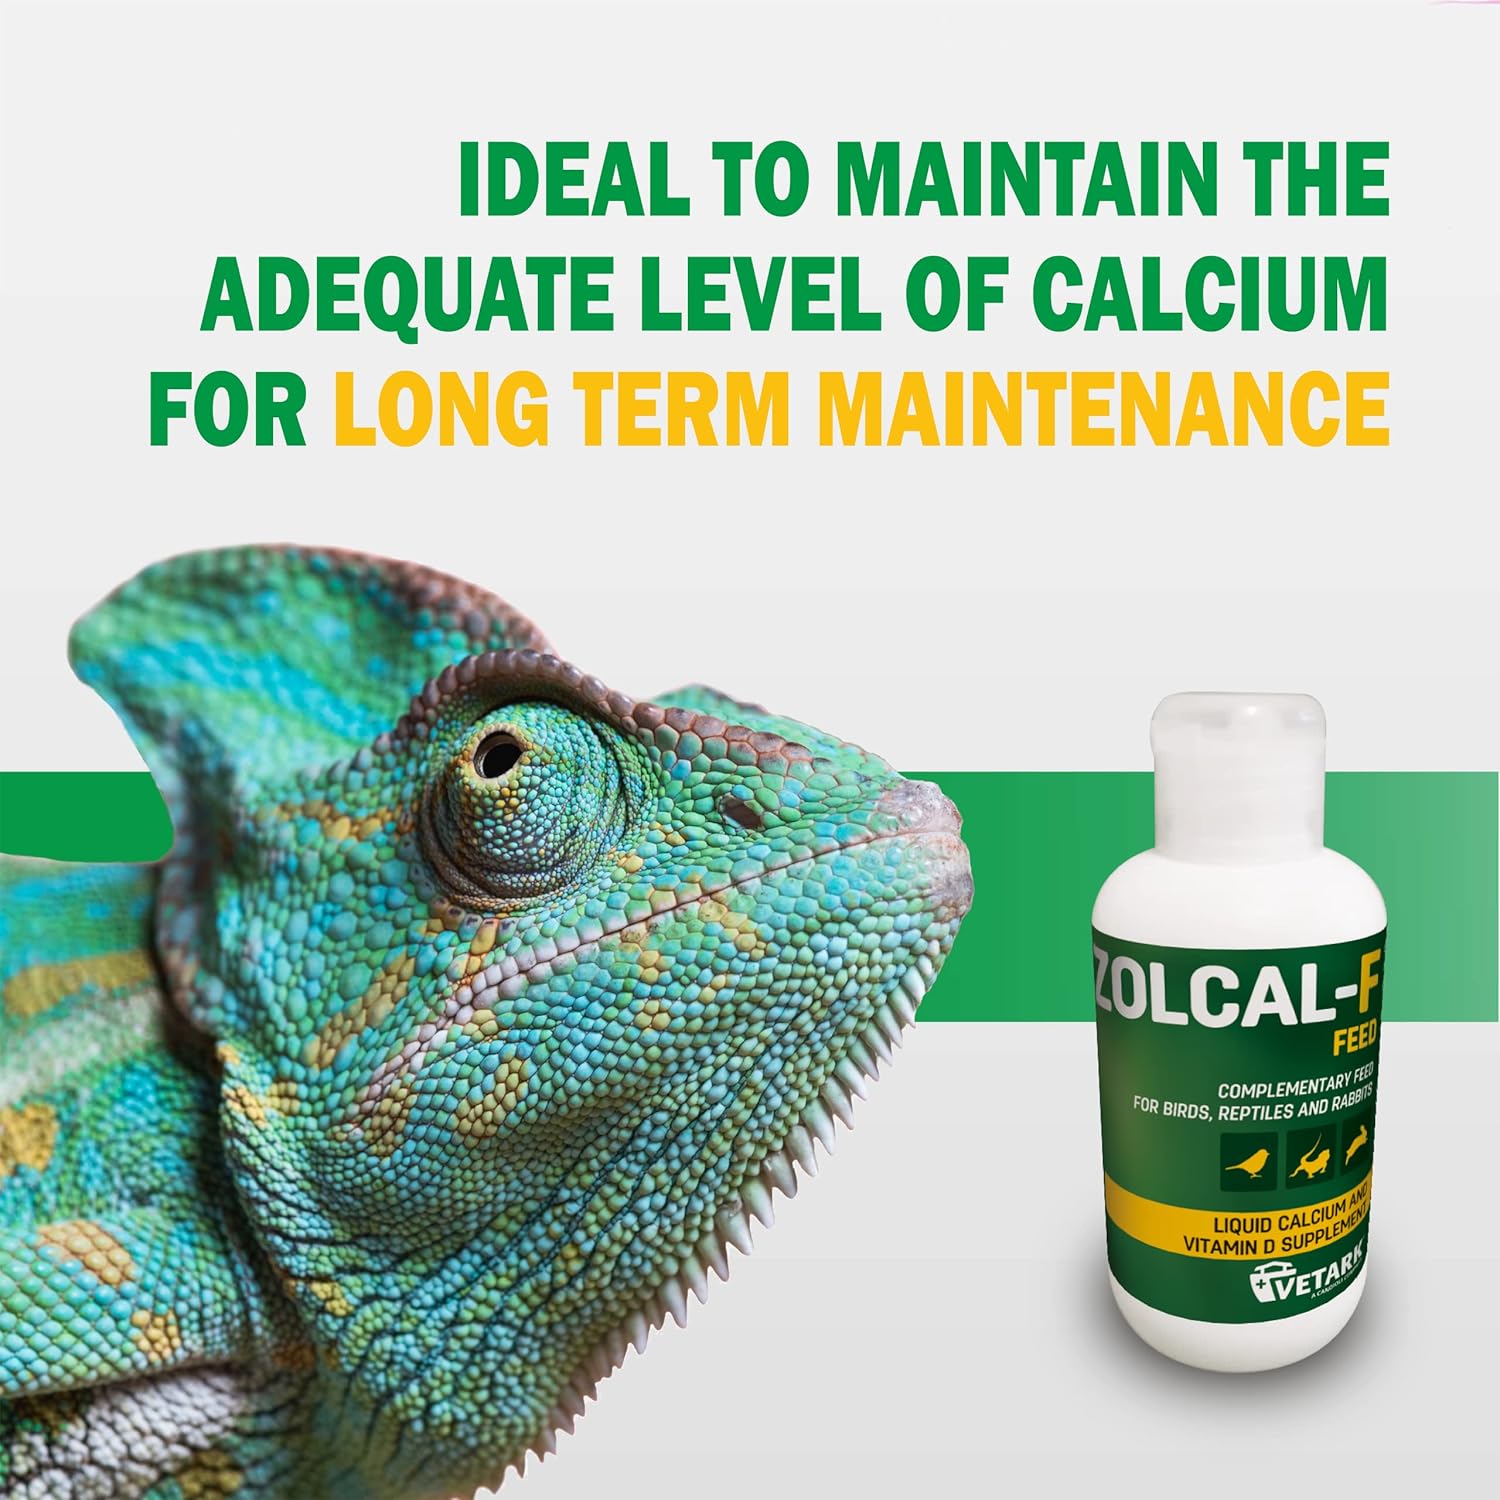 Zolcal-F Feed |Liquid Calcium & Vitamin D3 Supplement for Birds, Reptiles & Rabbits | Water-soluble | 120ml :Pet Supplies